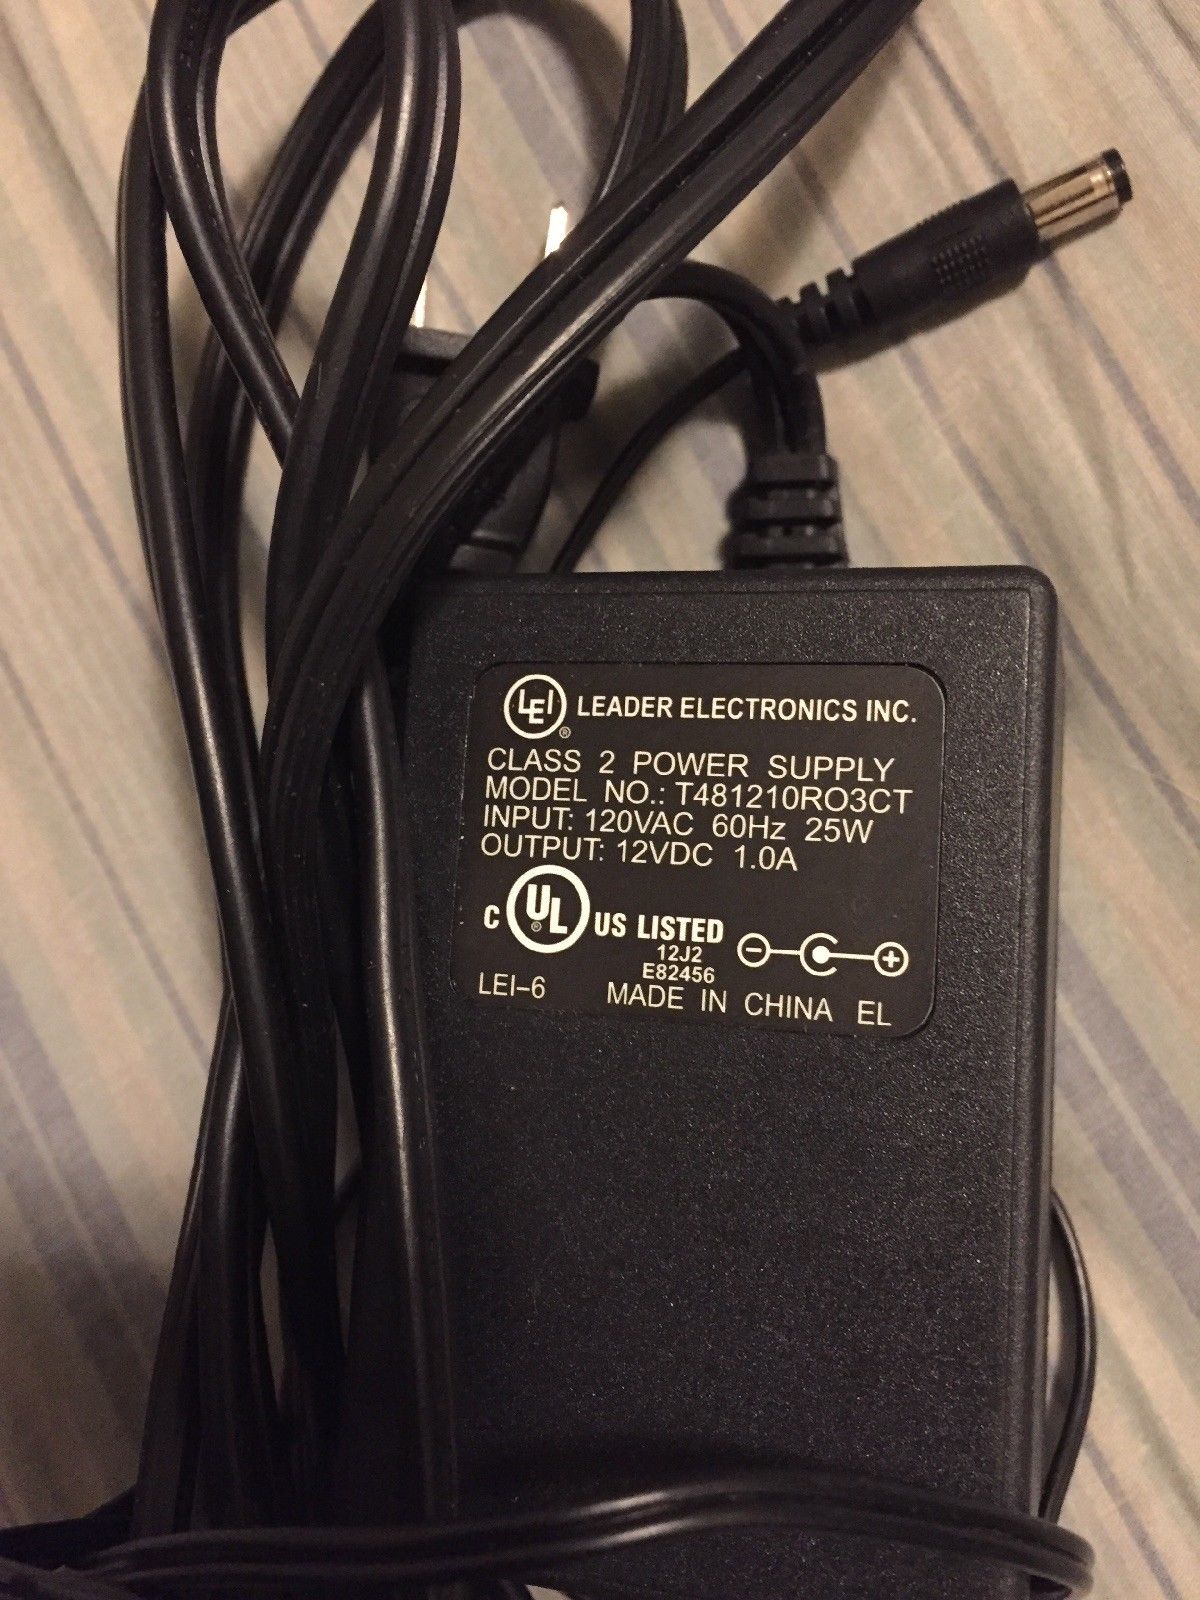 *Brand NEW* Misc 12vdc 1.0a ac adapter Power Adapter Cord LEI T481210RO3CT